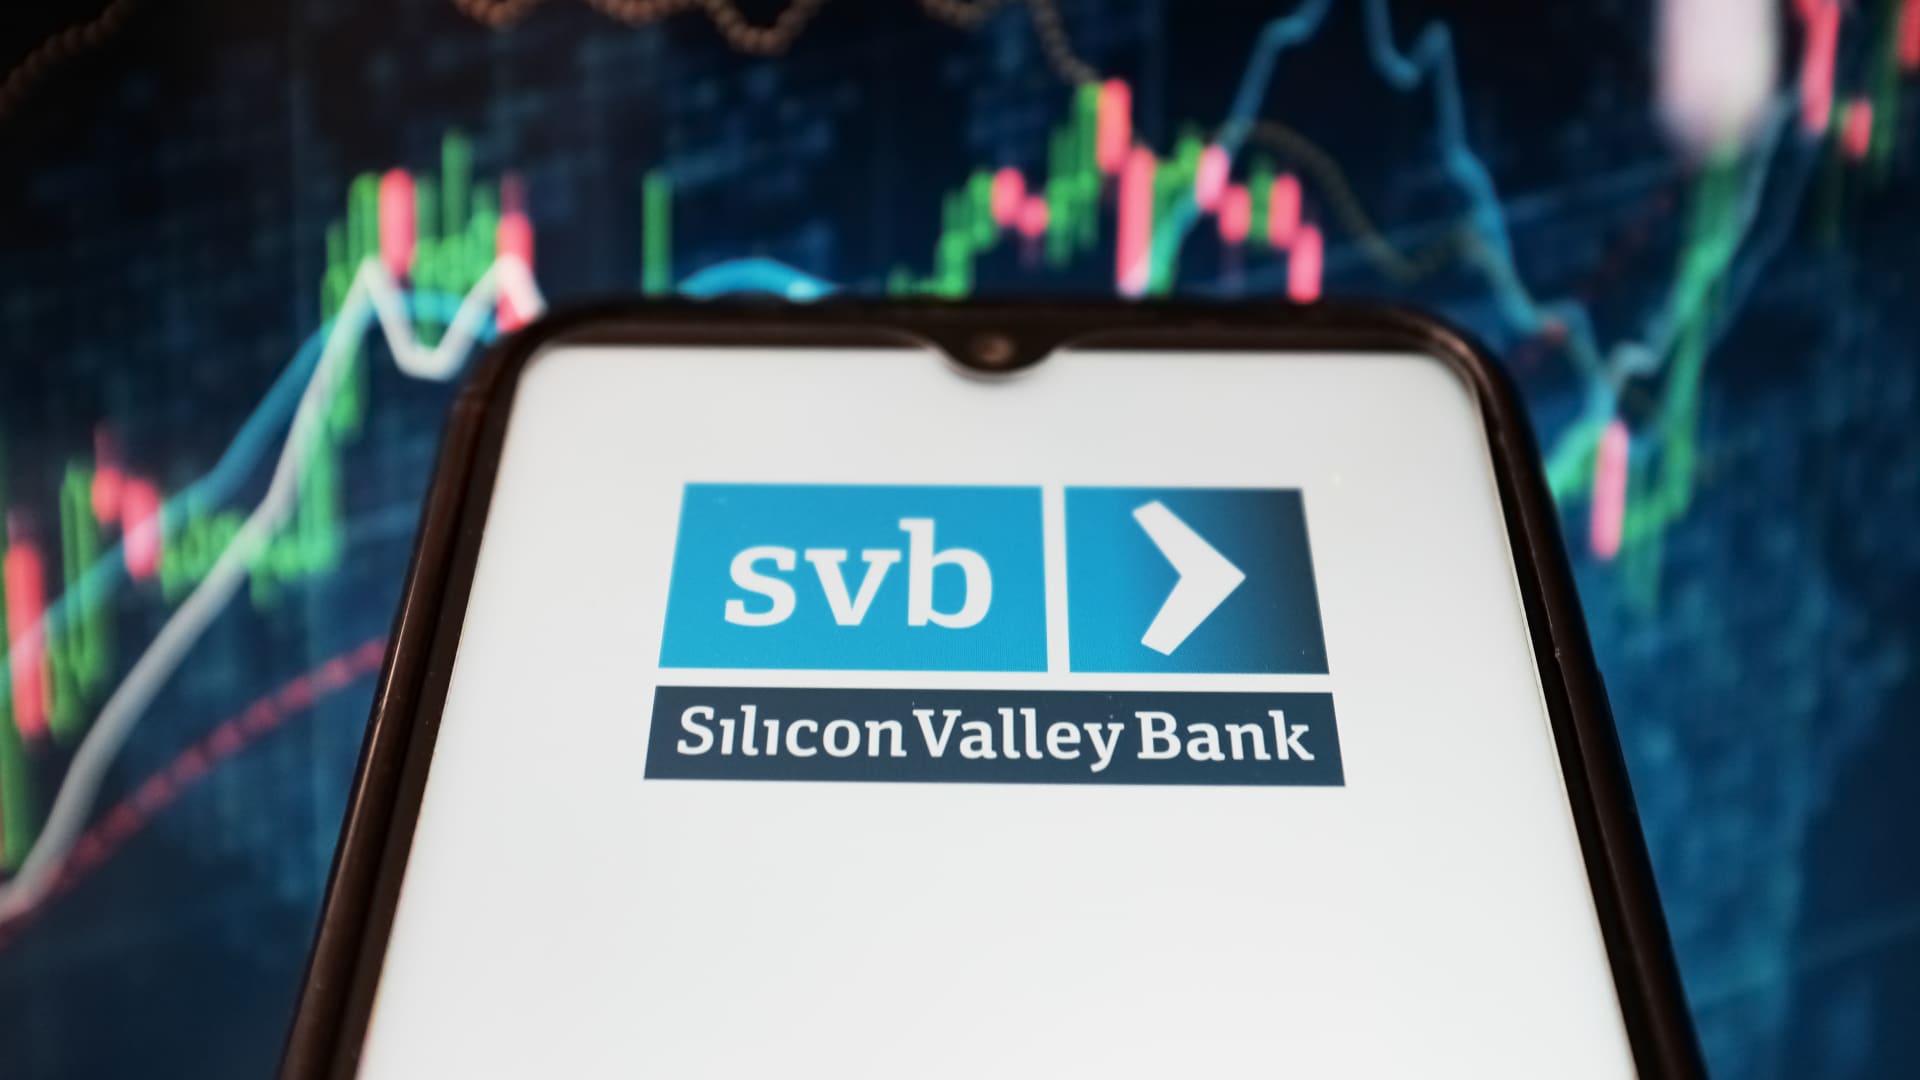 SVB's tech failings were a problem long before the bank run that led to its demise, critics say